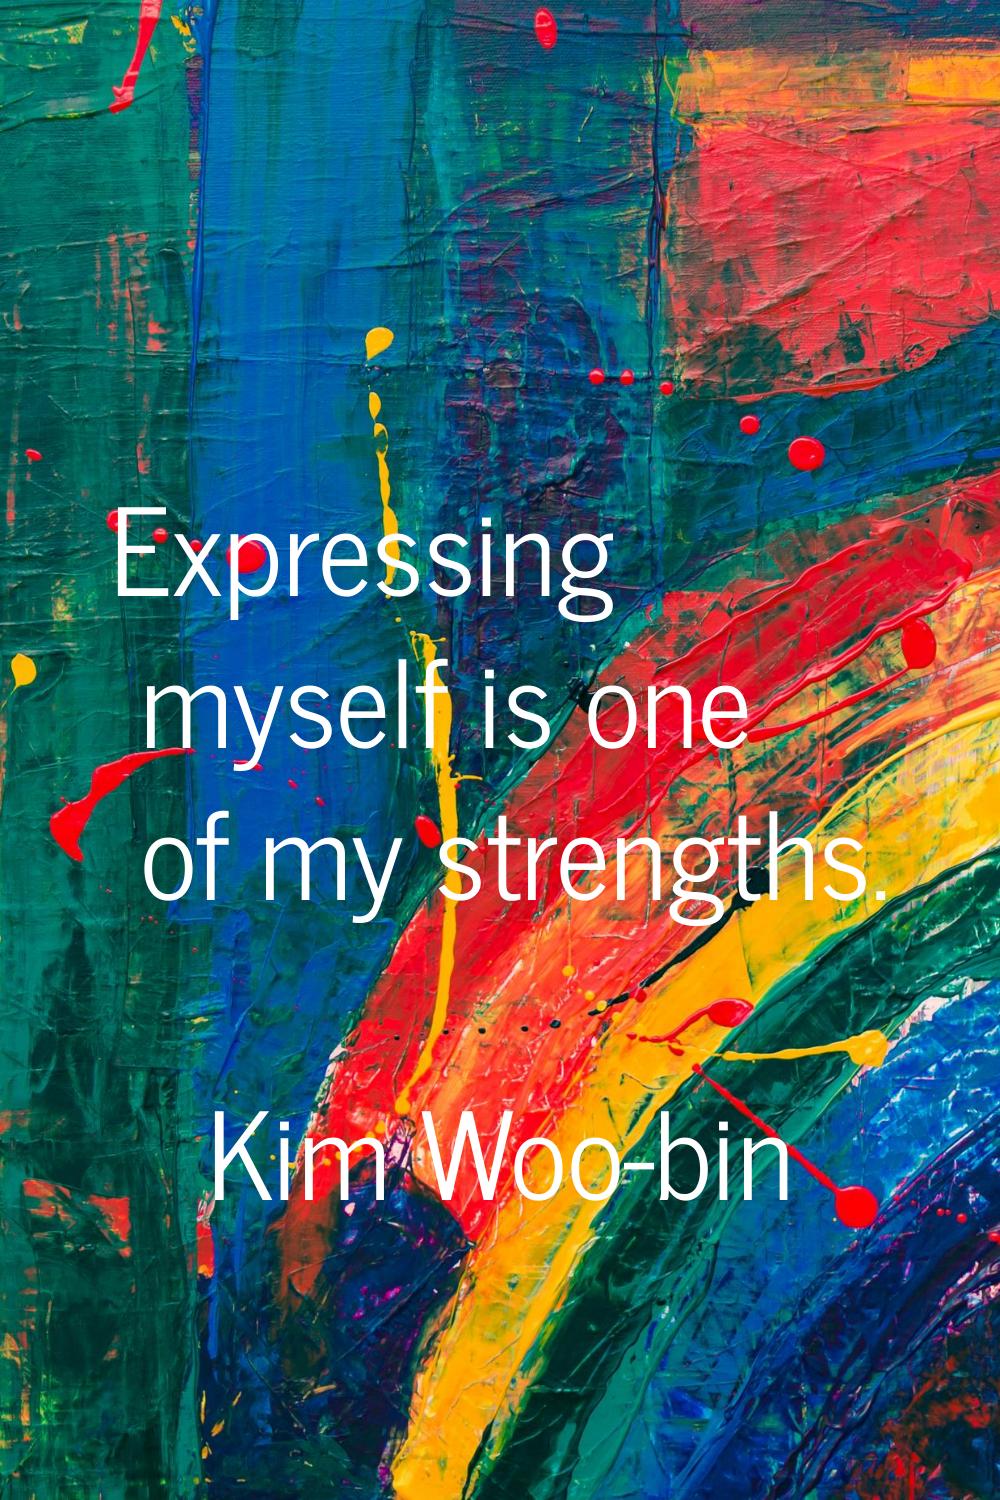 Expressing myself is one of my strengths.